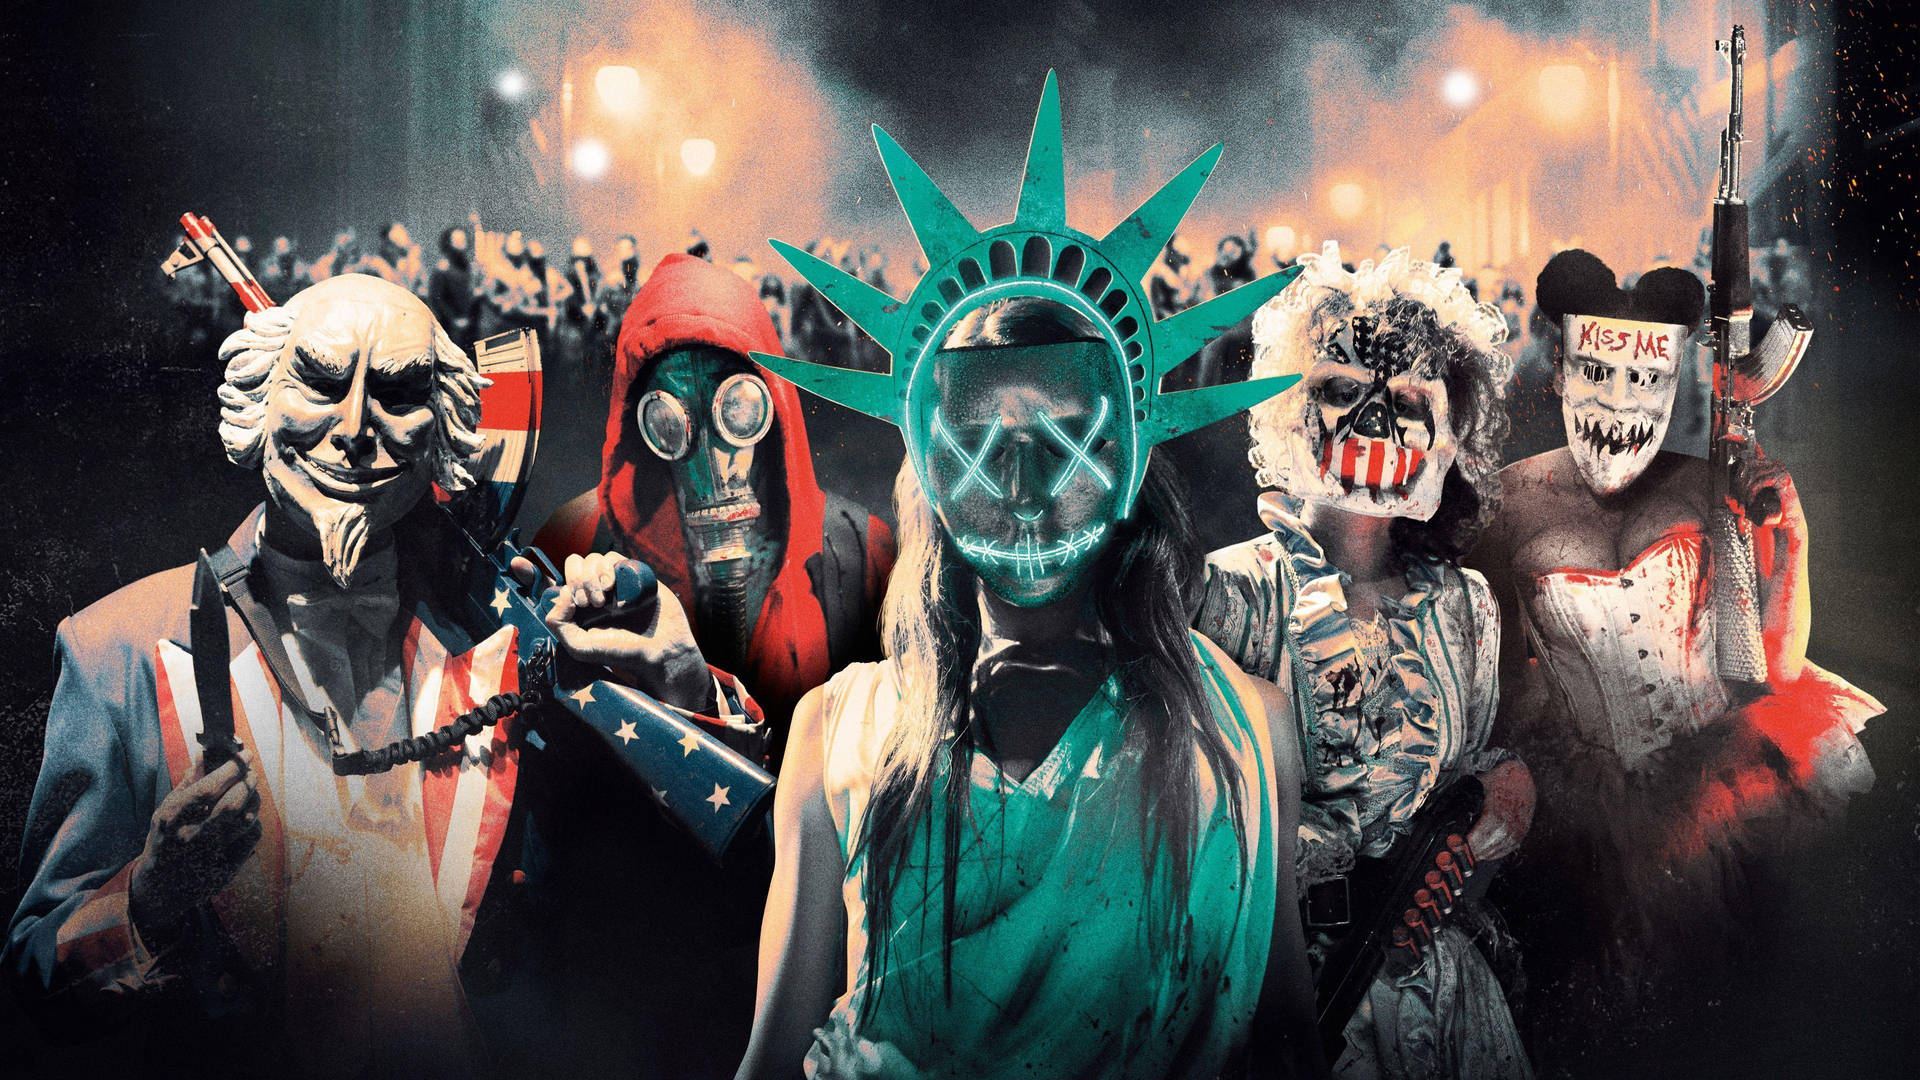 Free The Purge Wallpaper Downloads, [100+] The Purge Wallpapers for FREE |  